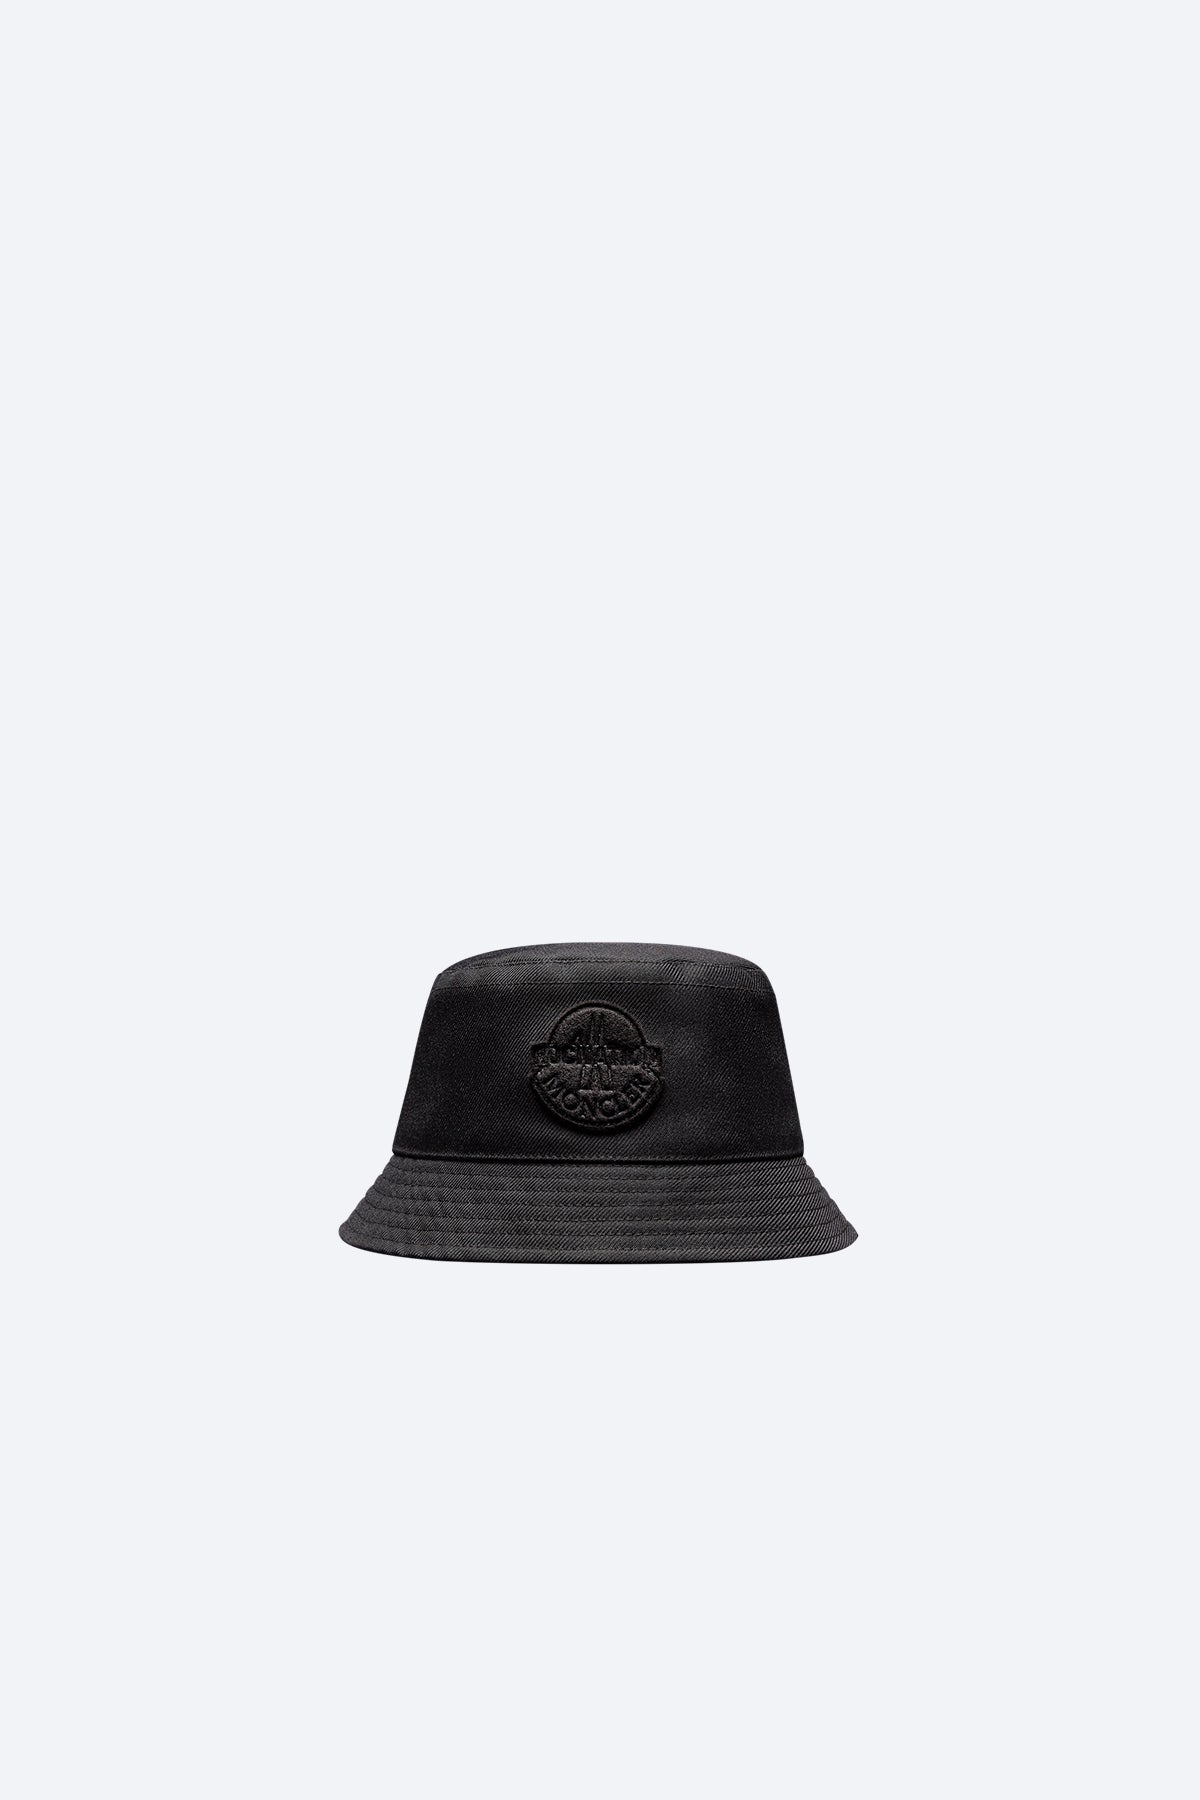 MONCLER X ROC NATION DESIGNED BY JAY-Z | TWILL BUCKET HAT